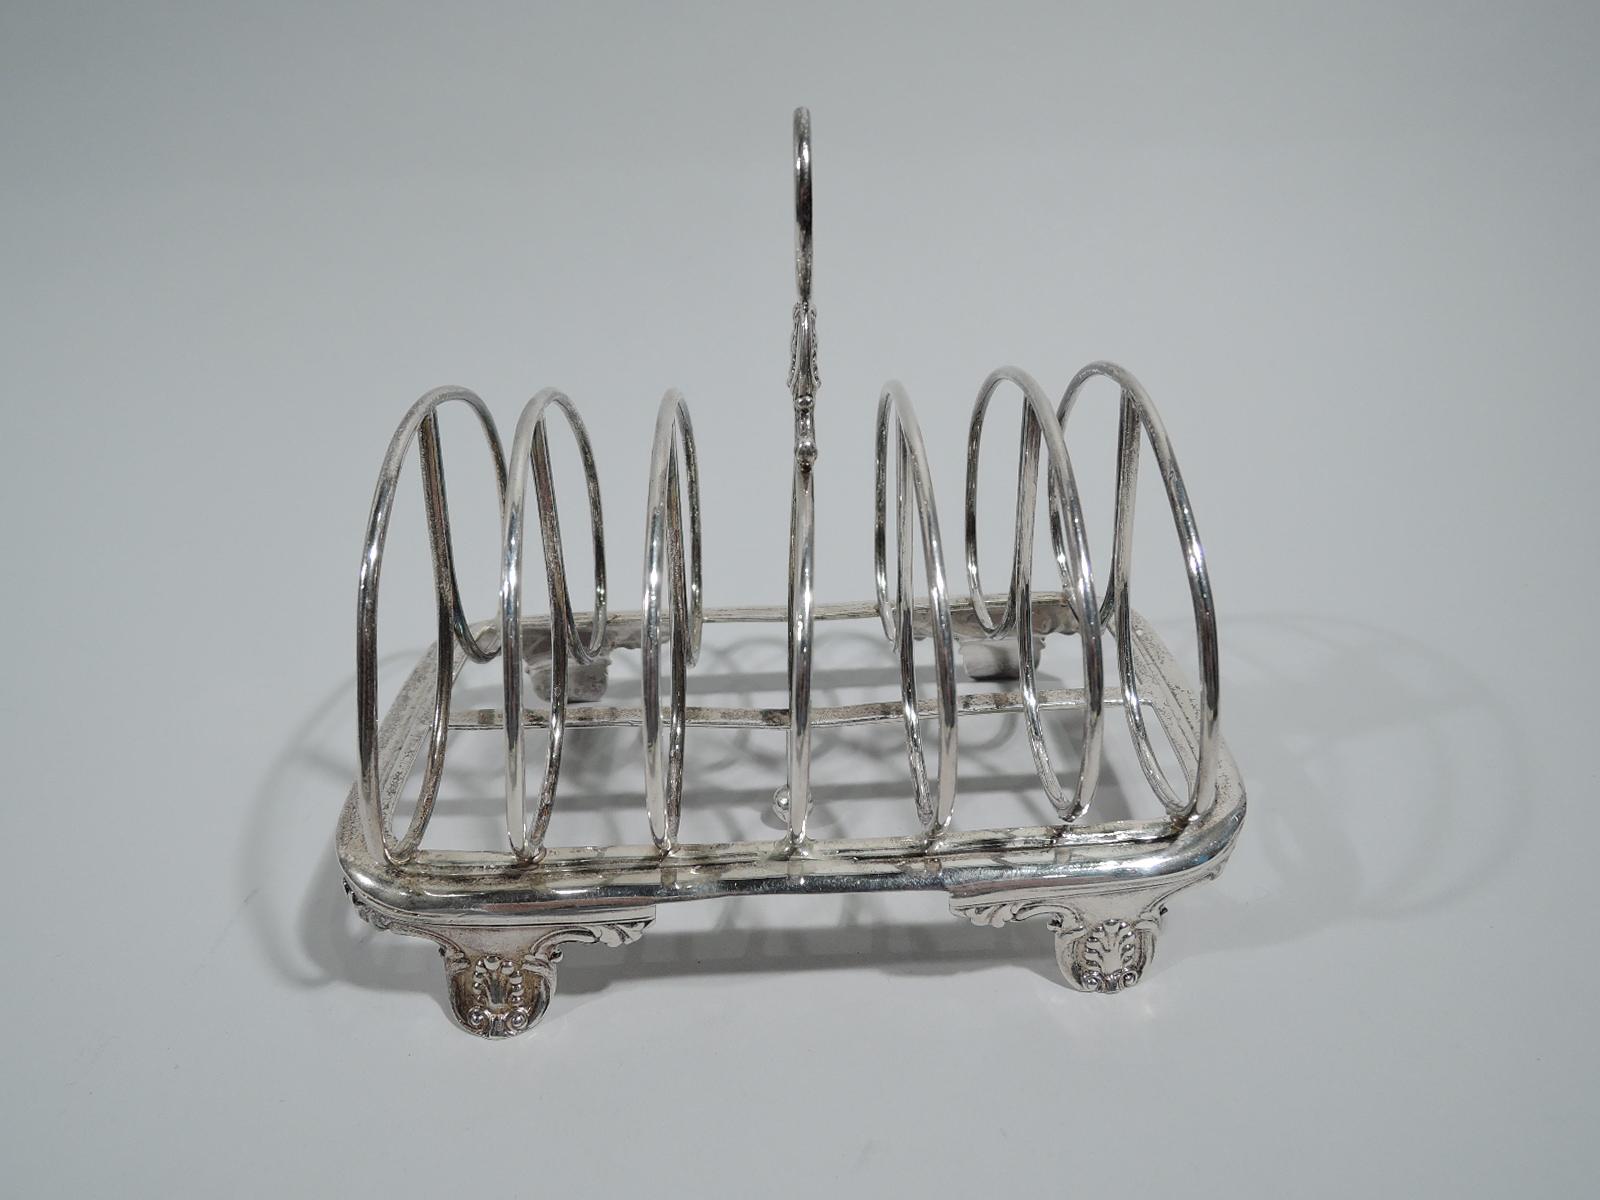 Victorian Georgian sterling silver toast rack. Made by Charles Thomas Fox in London in 1838. Seven double hoop partitions; central partition has ring handle with scroll and shell mount. Rectangular frame with curved corners and central partition; 4